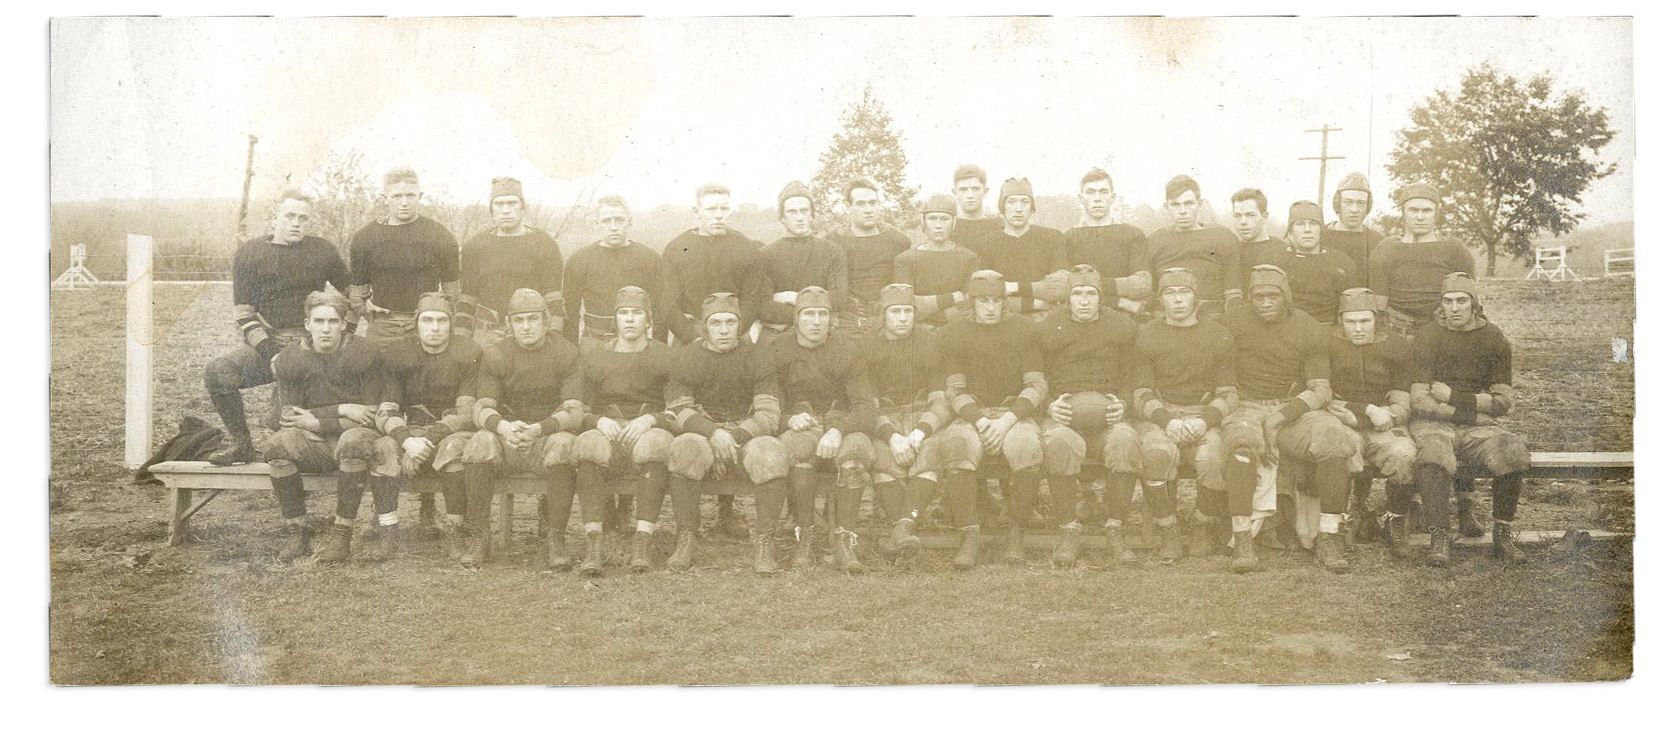 - 1917 Rutgers Team Photo with Paul Robeson